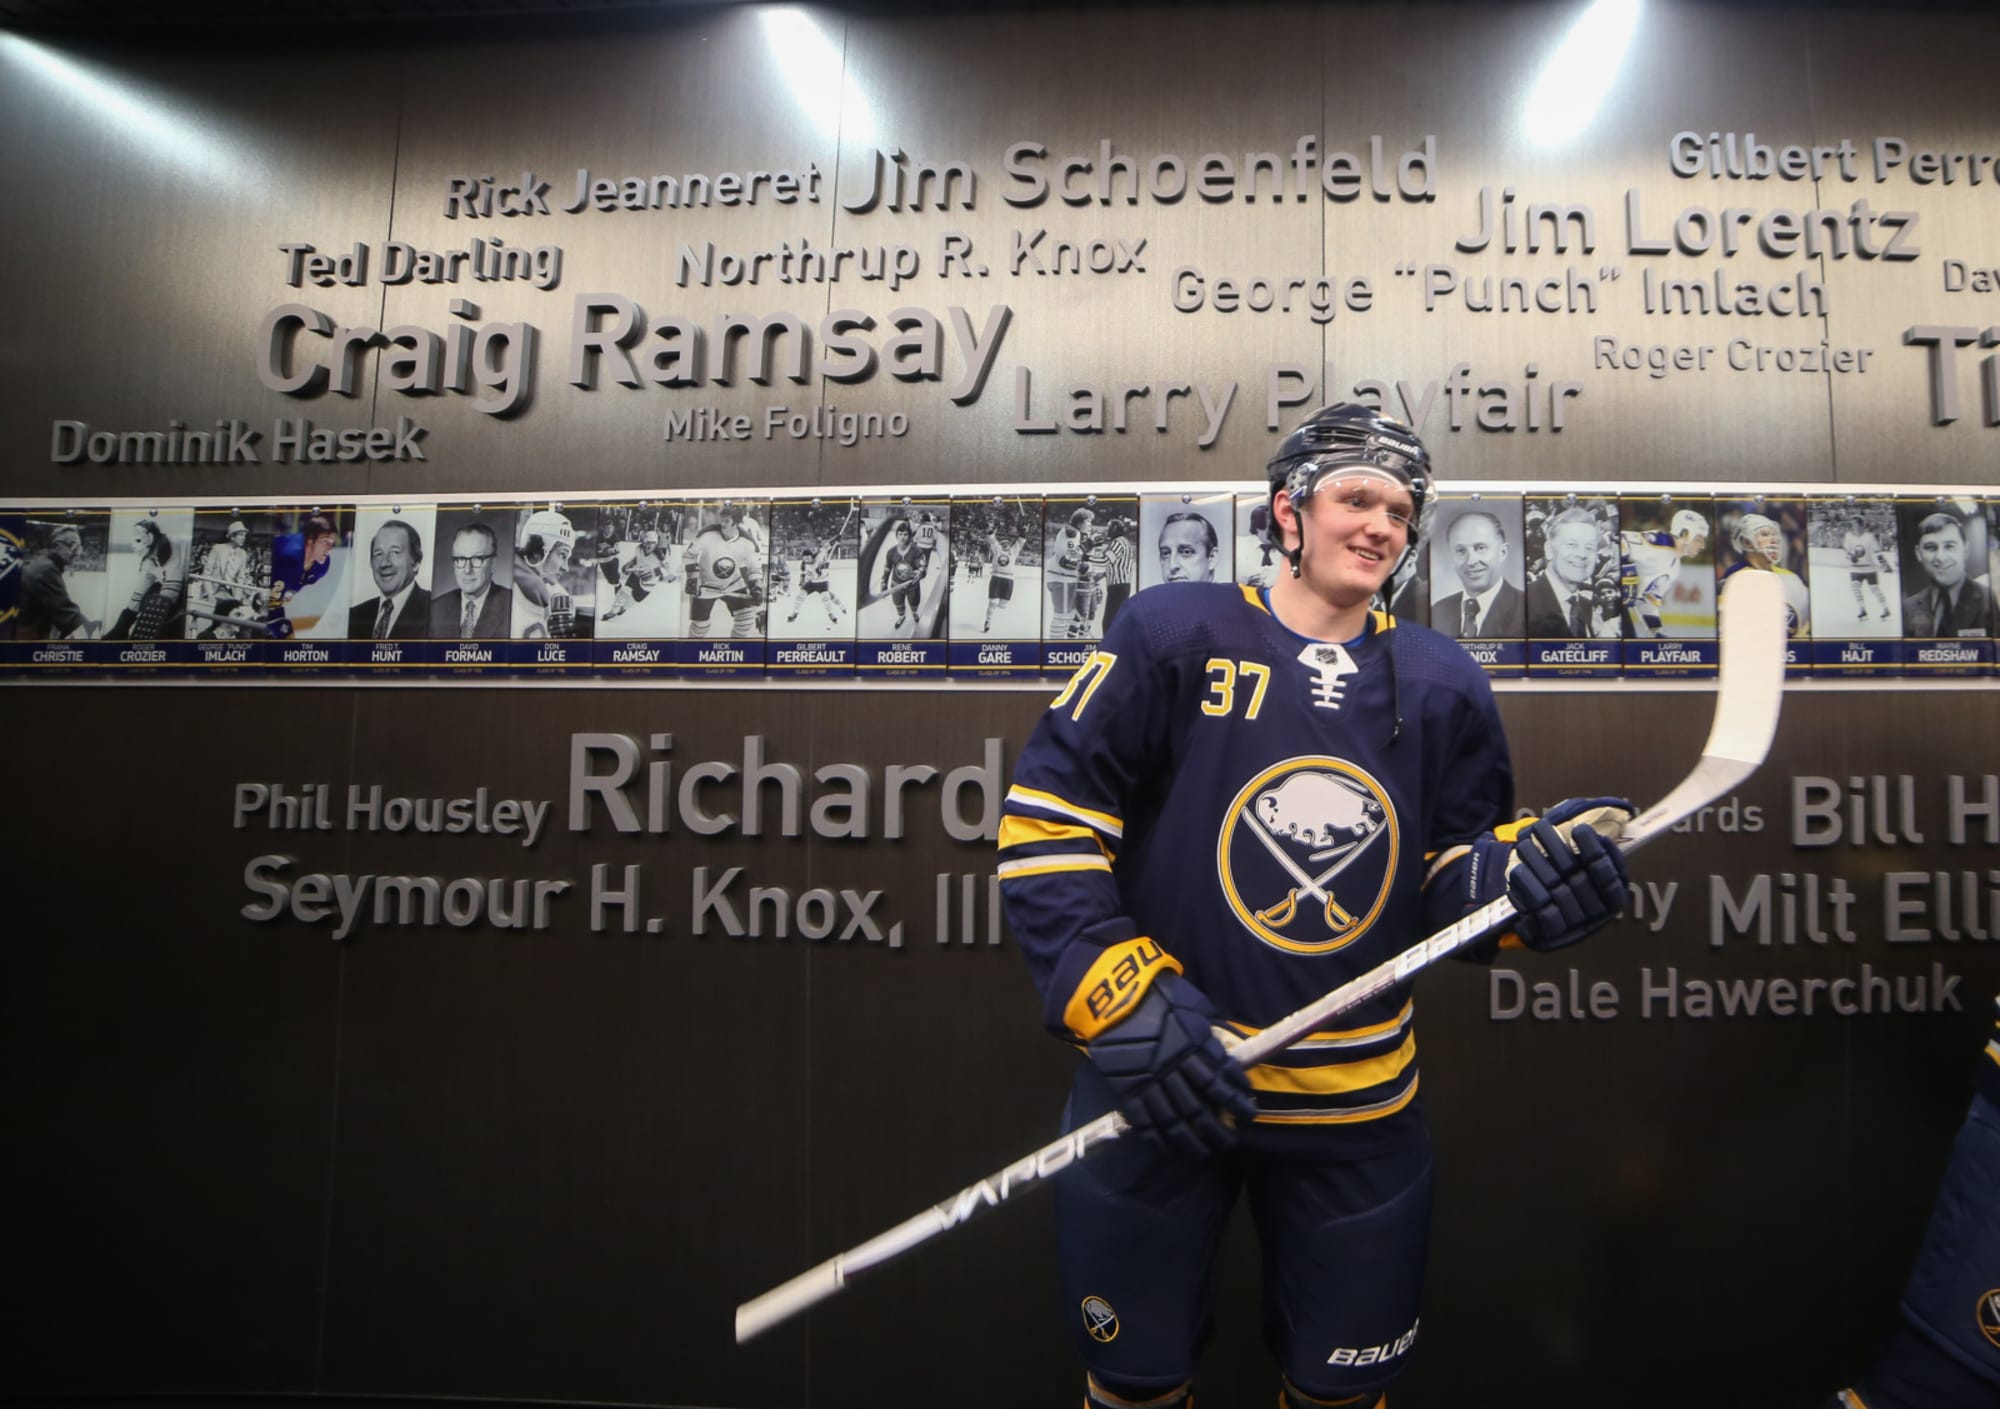 Buffalo Sabres' Rasmus Ristolainen eager to play after COVID - ESPN